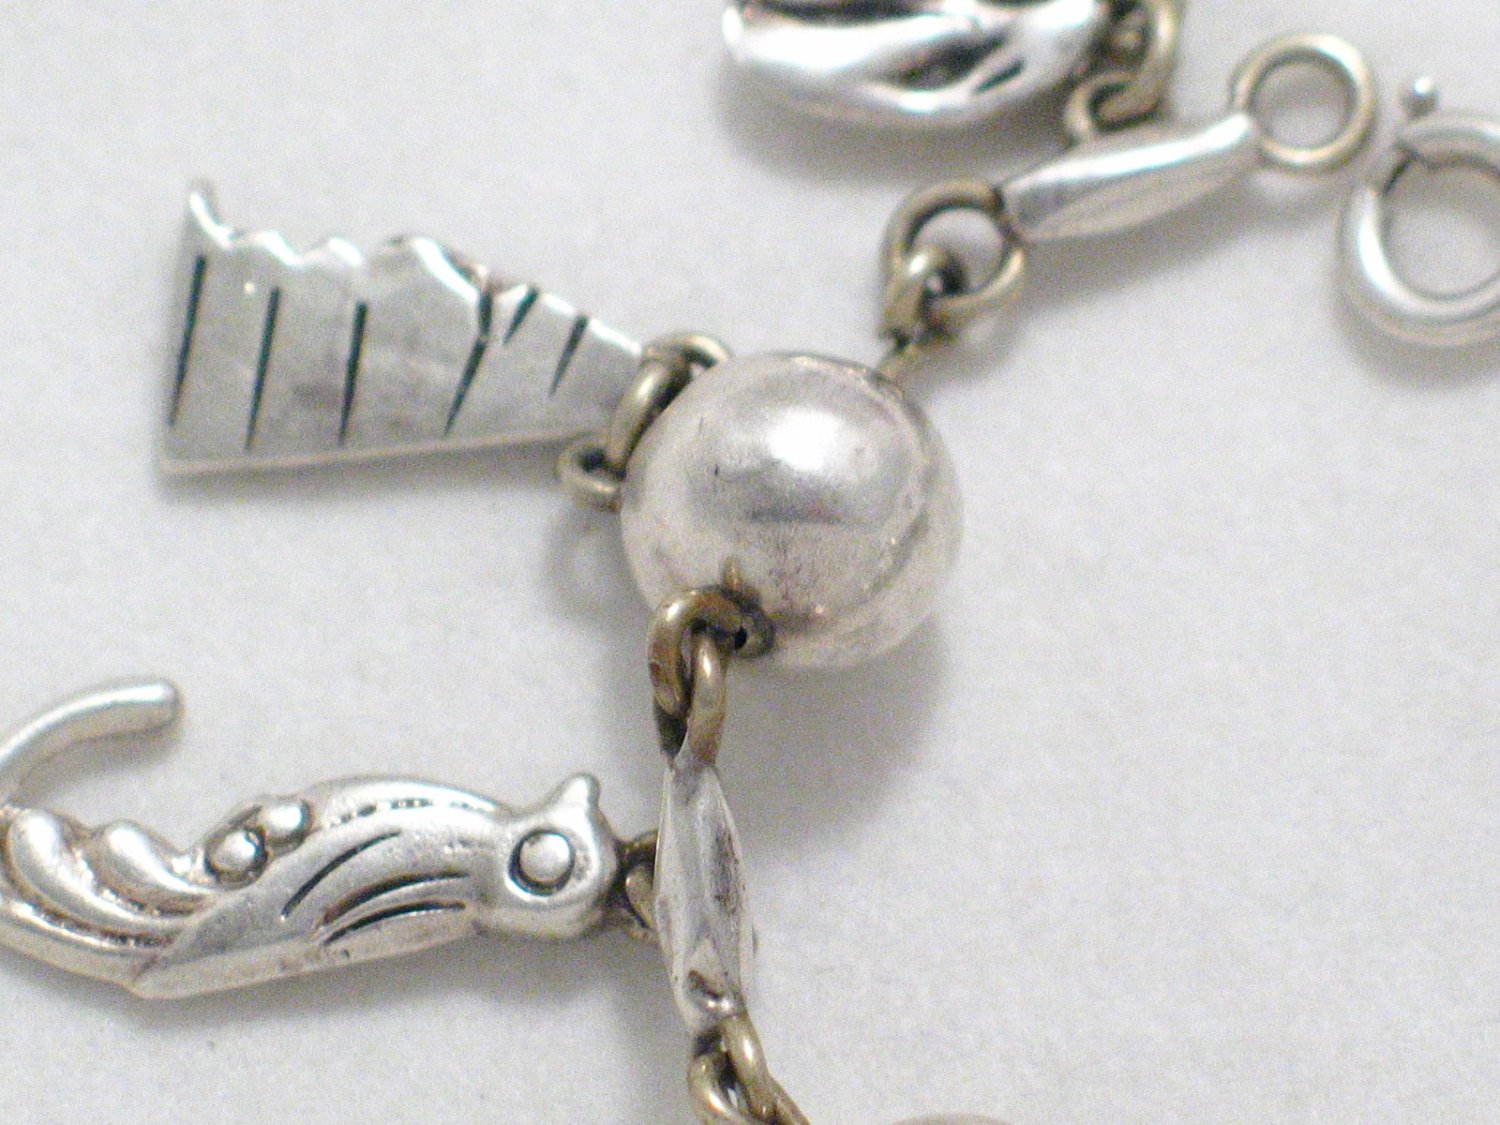 Bracelet | Vintage Sterling Silver Mexican Mayan Ball Chain Charm Bracelet 7" | Jewelry